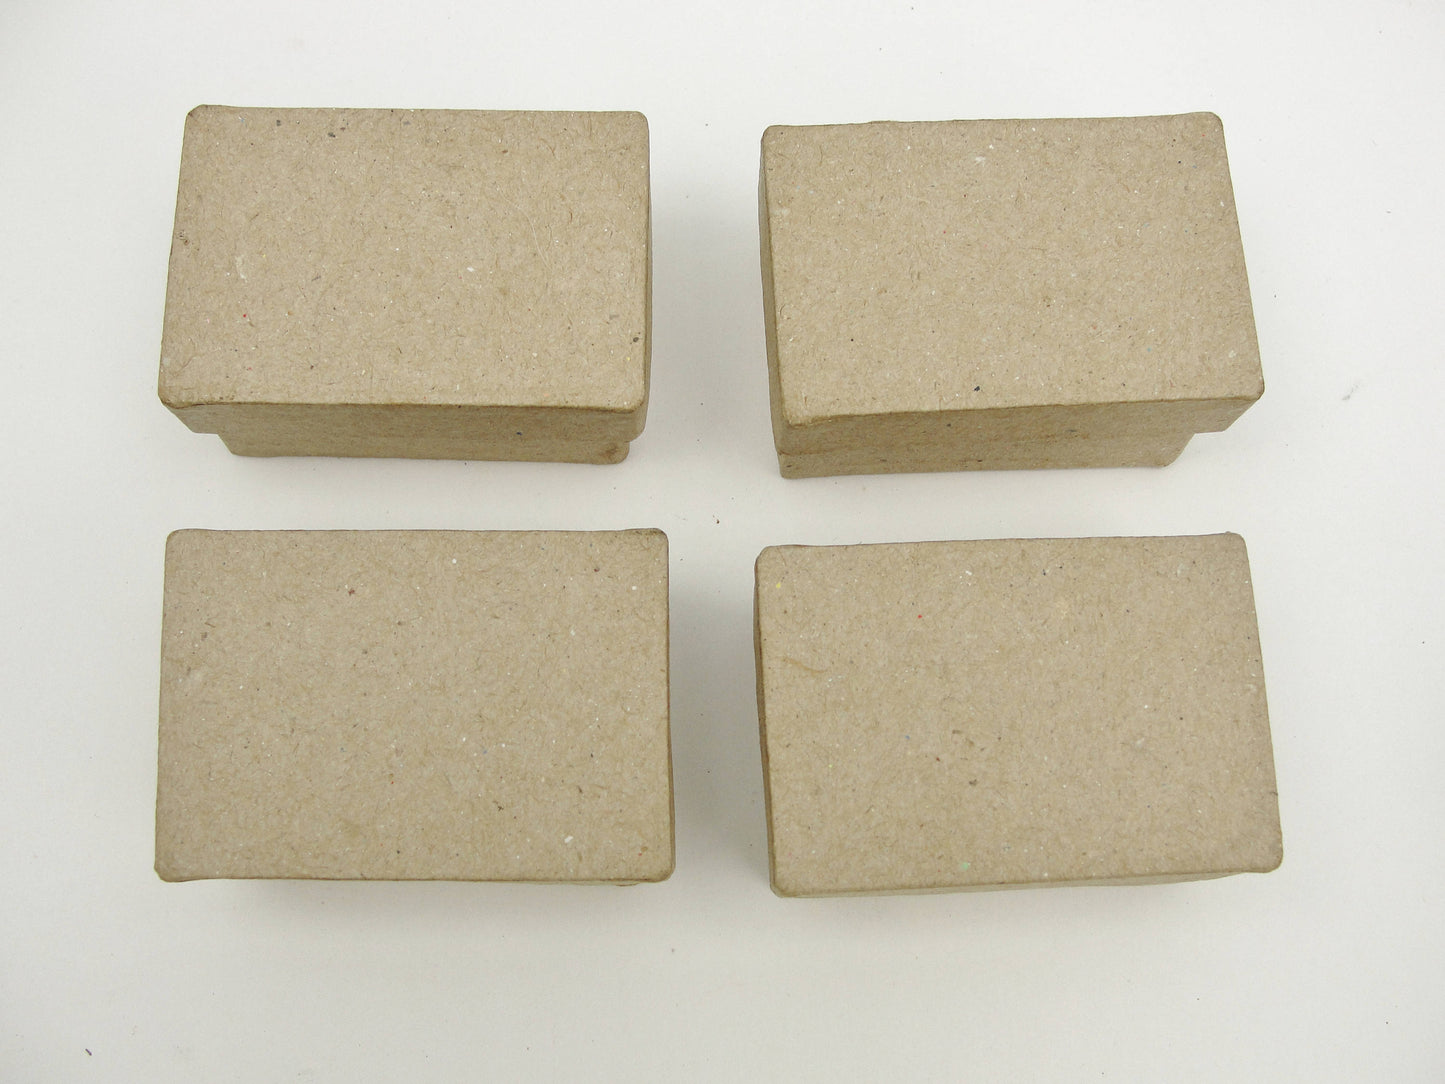 Micro gift boxes set of 4, choose your shape - Paper Mache - Craft Supply House